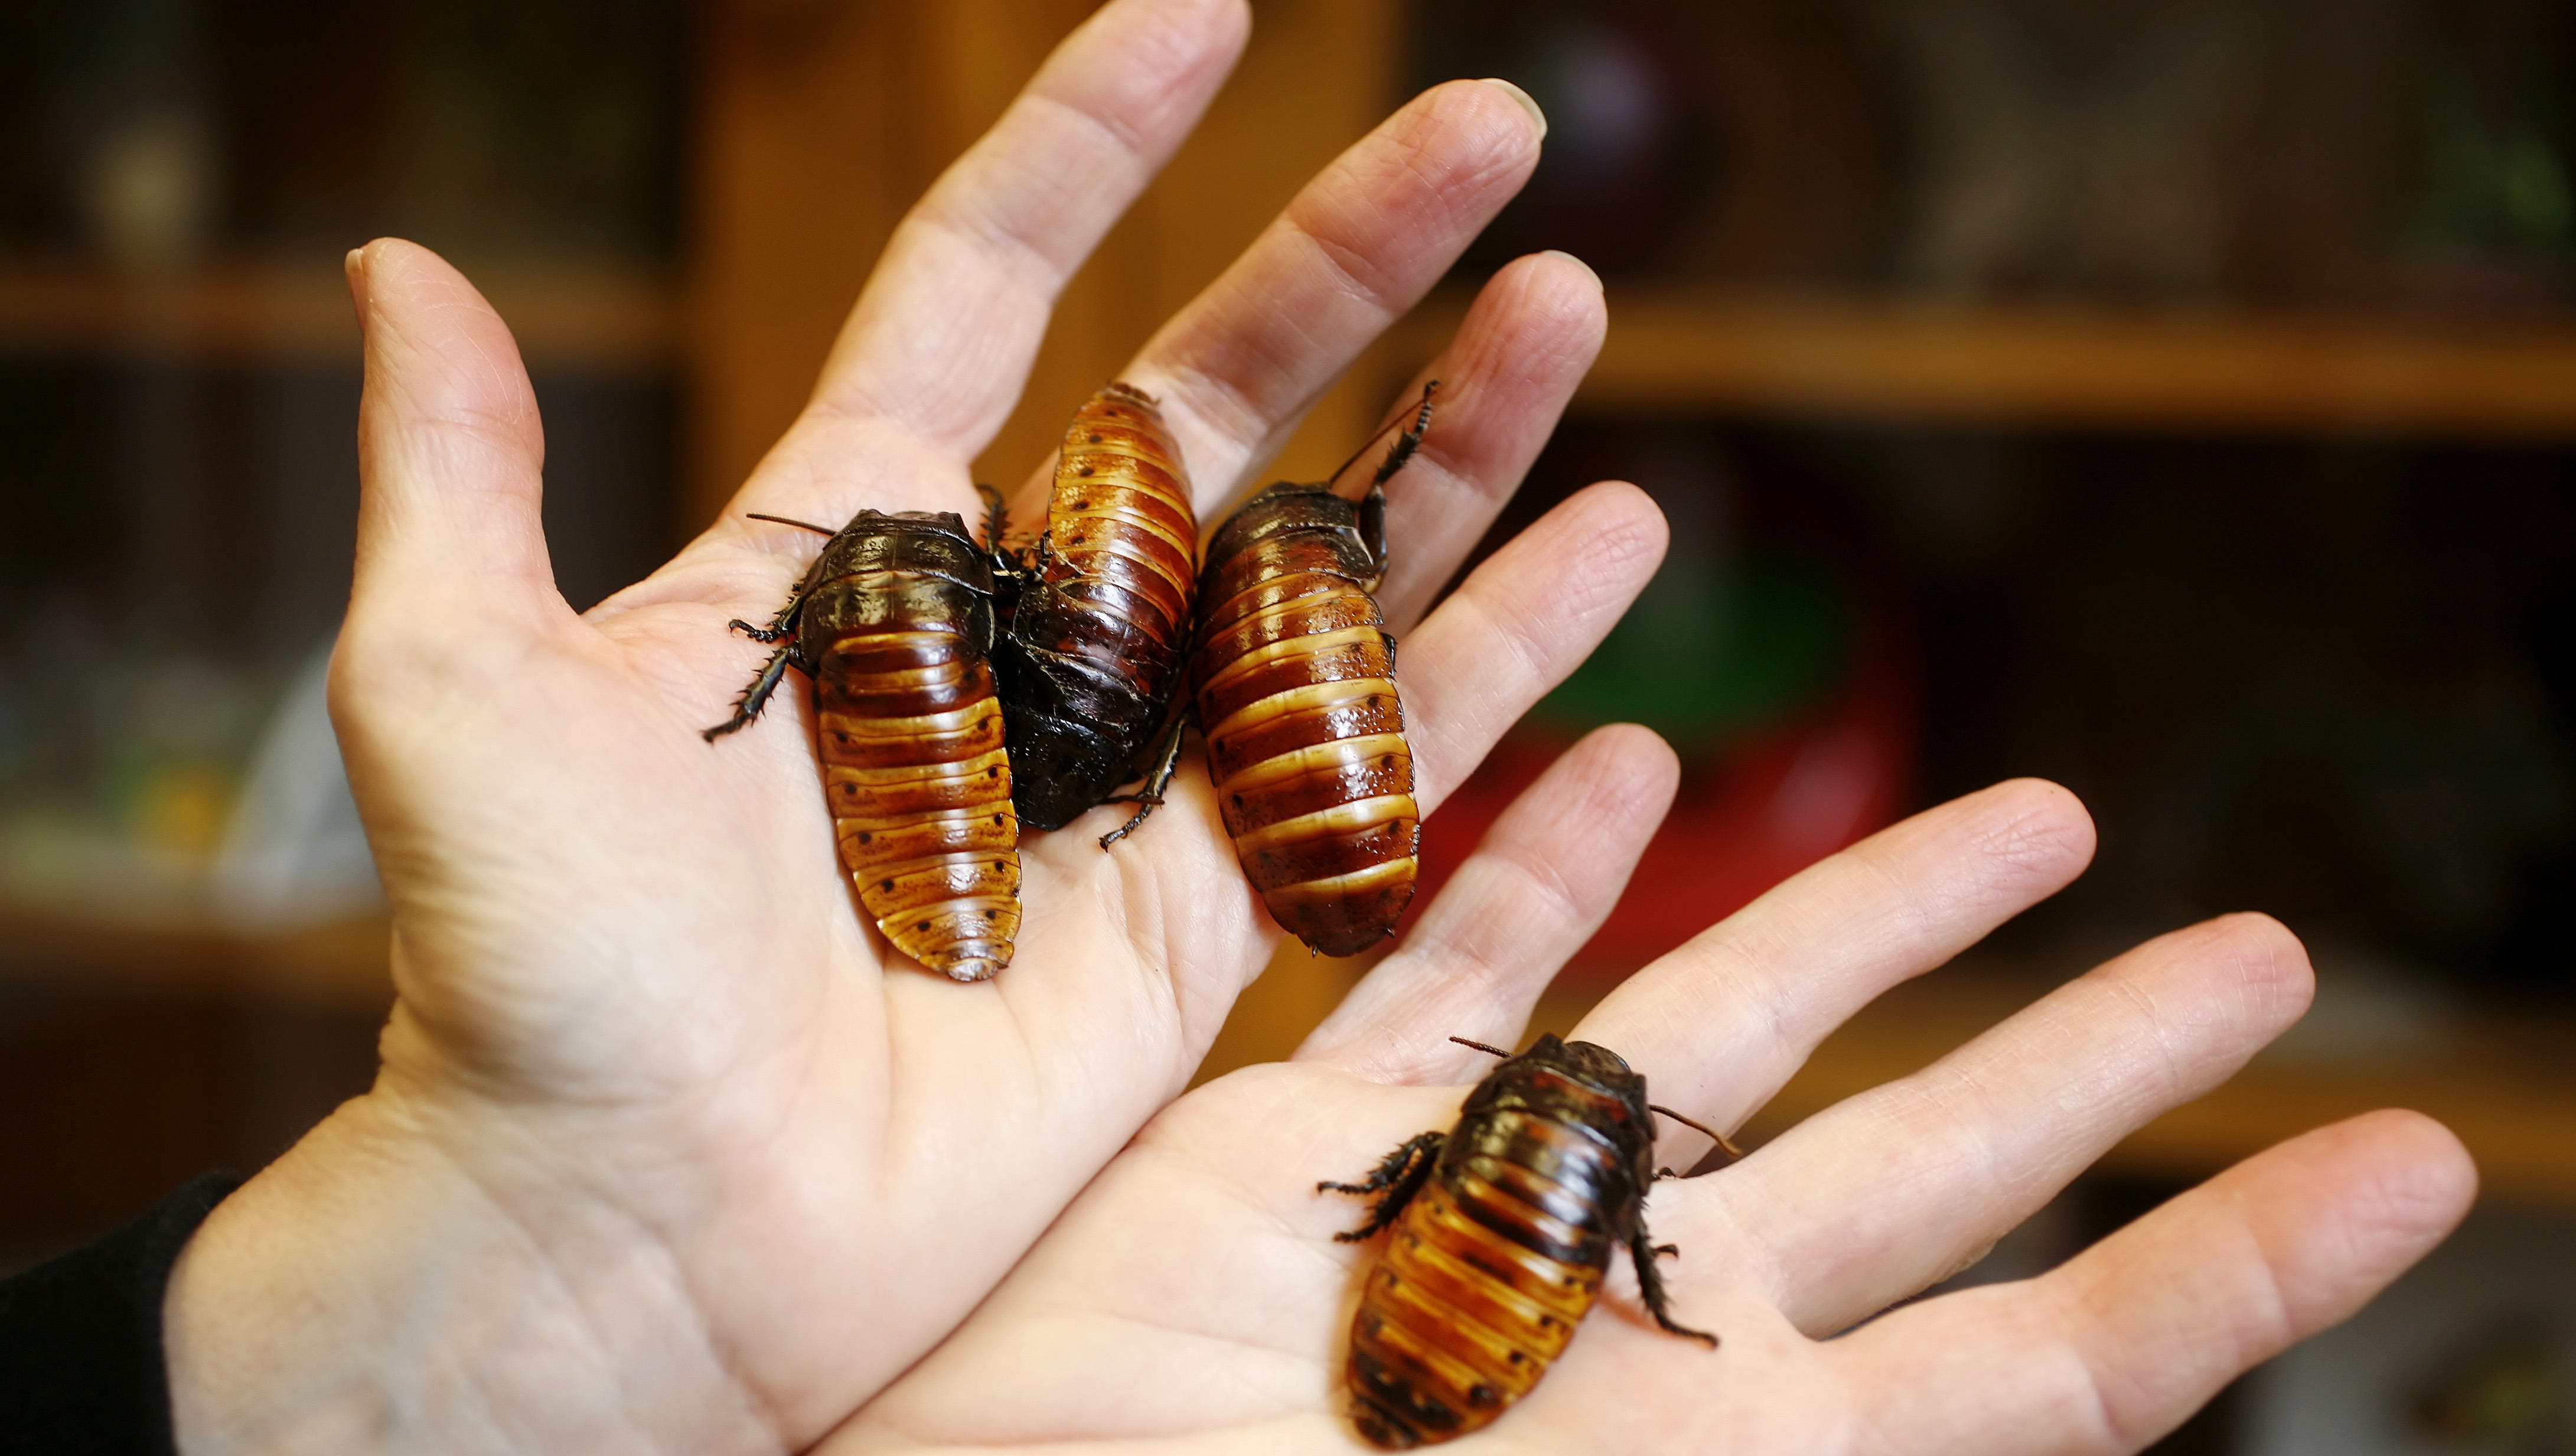 How to keep cockroaches out of your home?